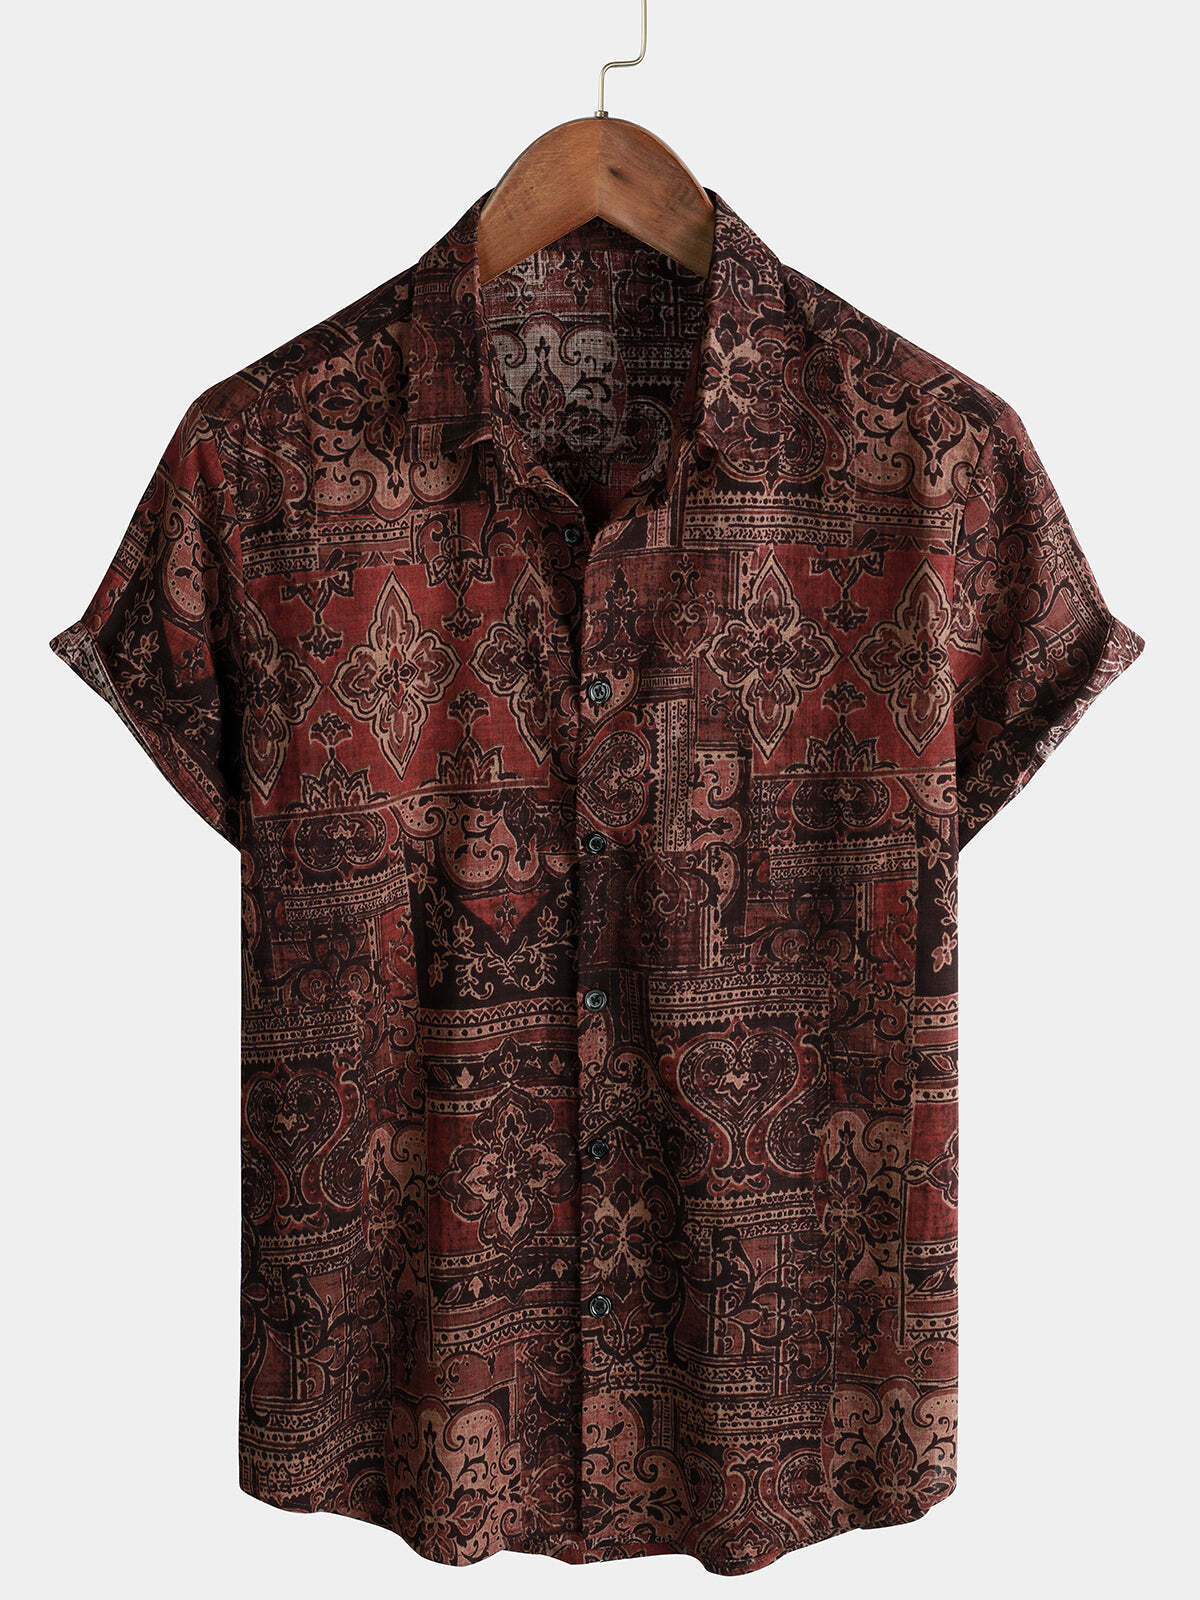 Men's Retro Paisley Floral Print Cotton Button Up Vintage Holiday Western Brown Short Sleeve Shirt